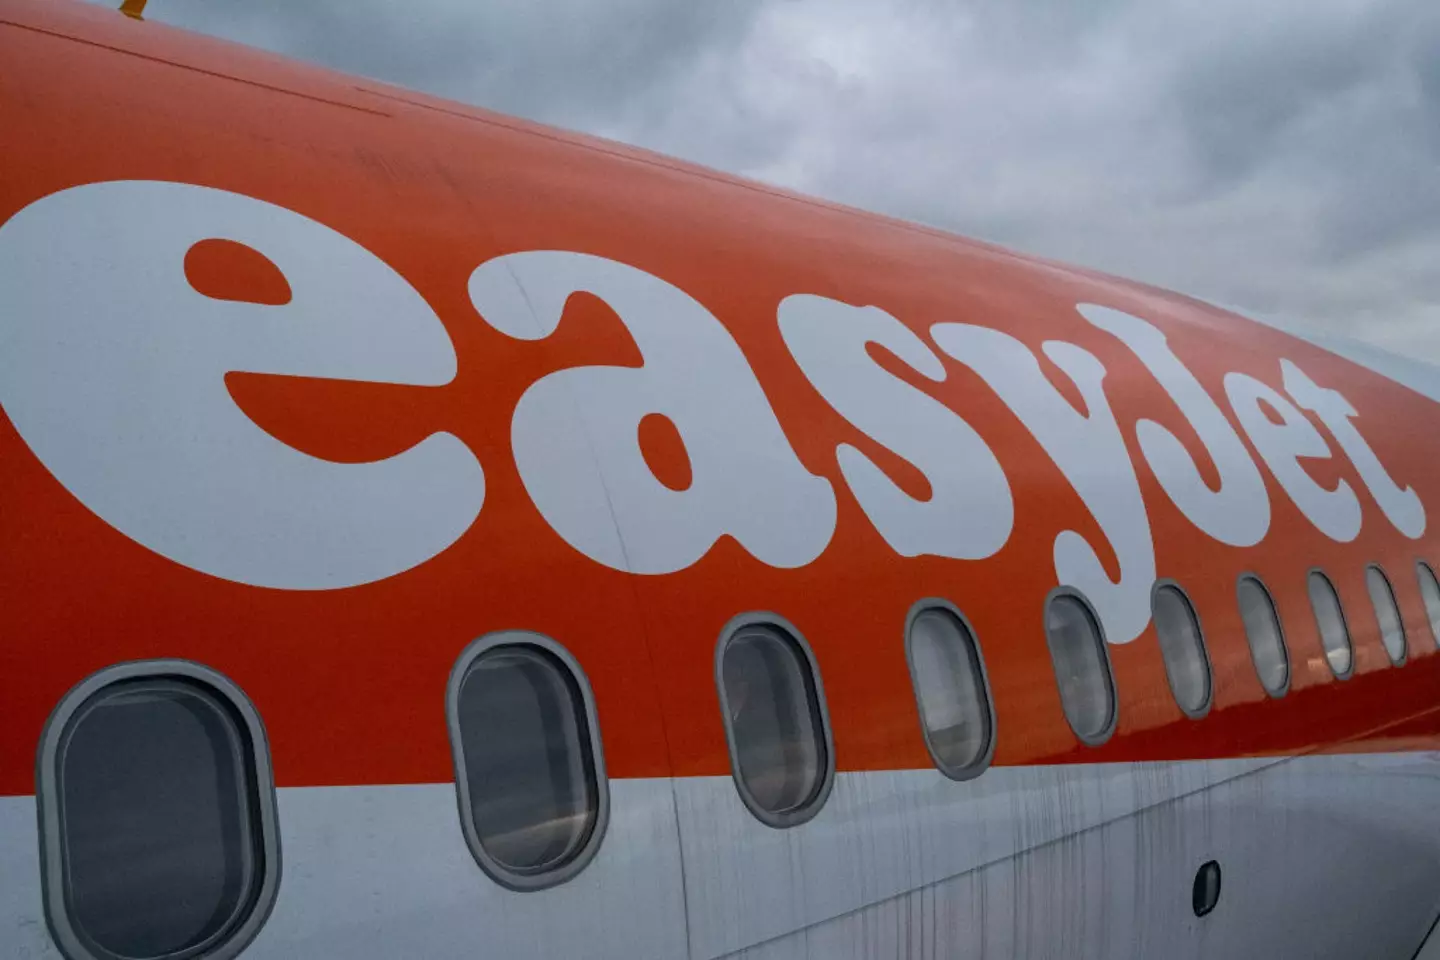 EasyJet has since issued a statement on the matter. (MARTIN BERTRAND / Contributor / Getty Images)